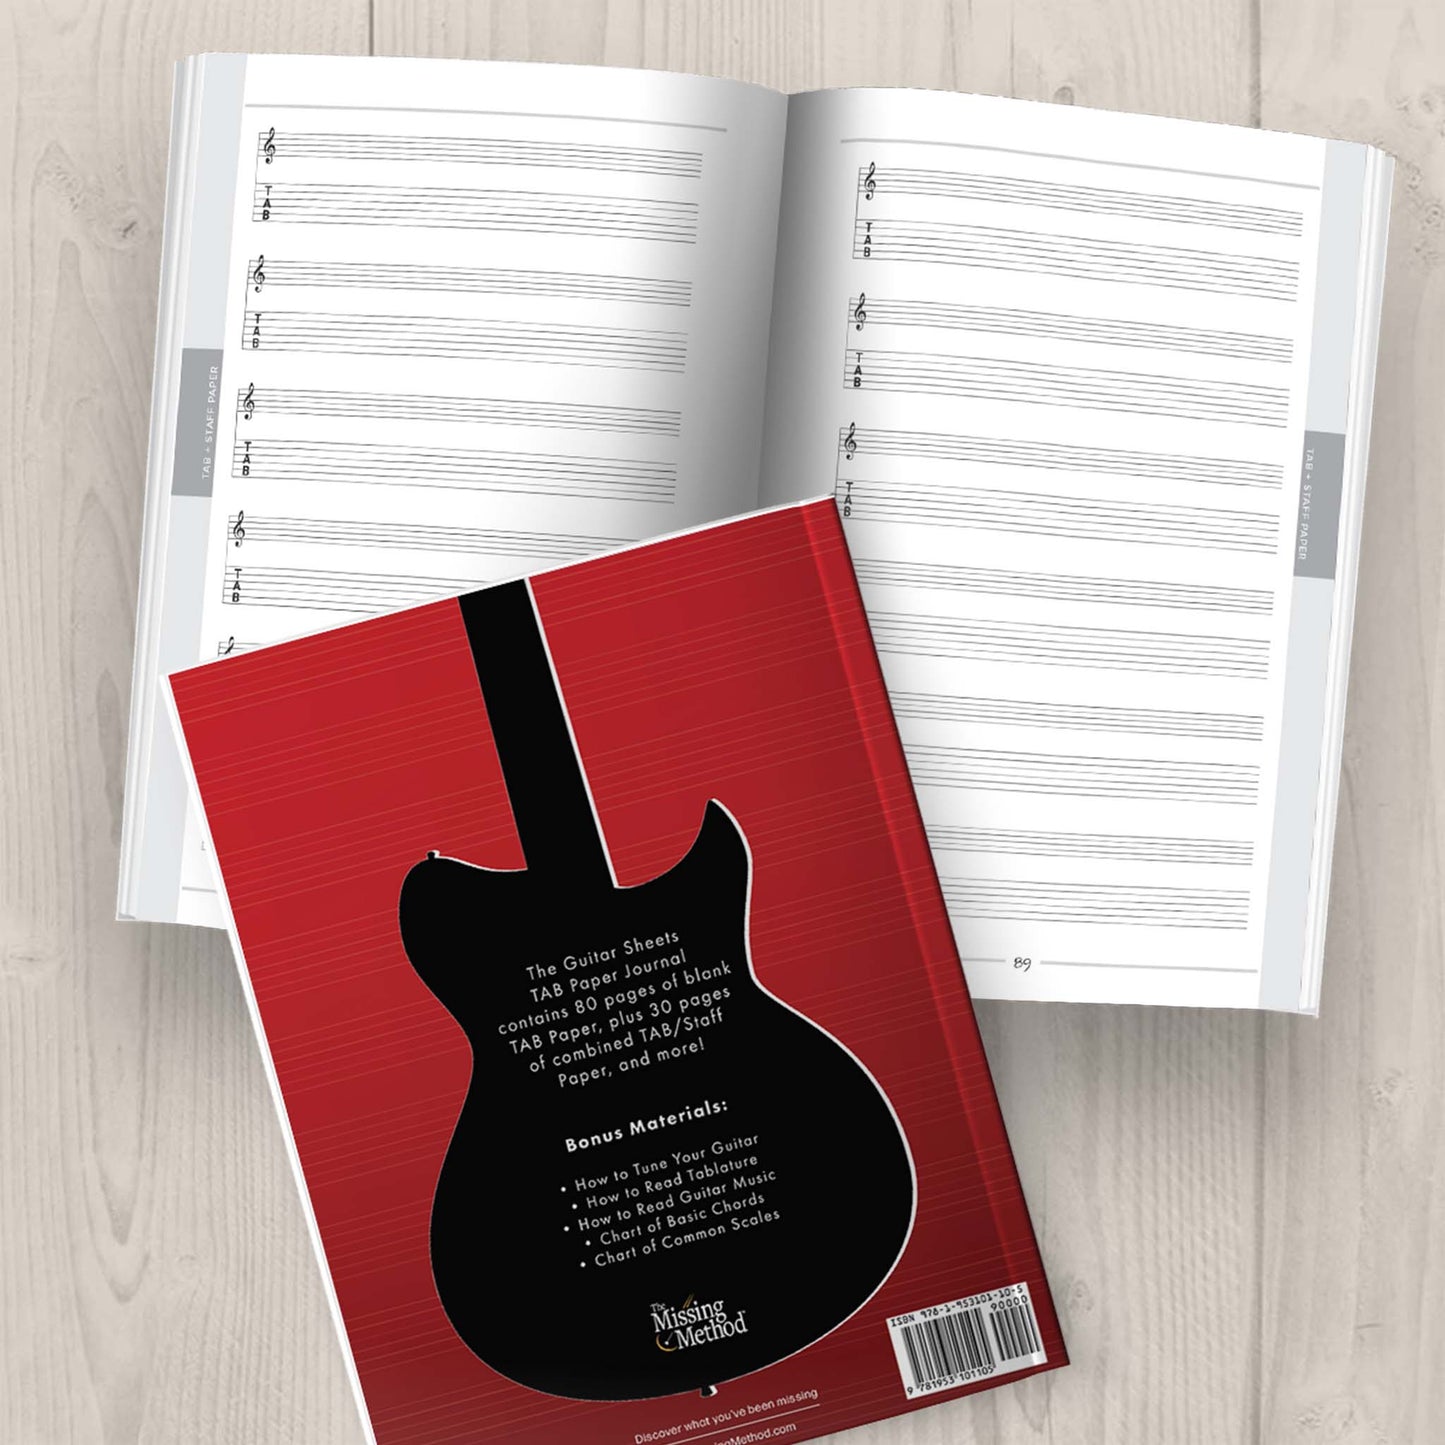 Guitar Sheets TAB Paper Journal from The Missing Method for Guitar, closed book displaying back cover and open book displaying pages on a tabletop